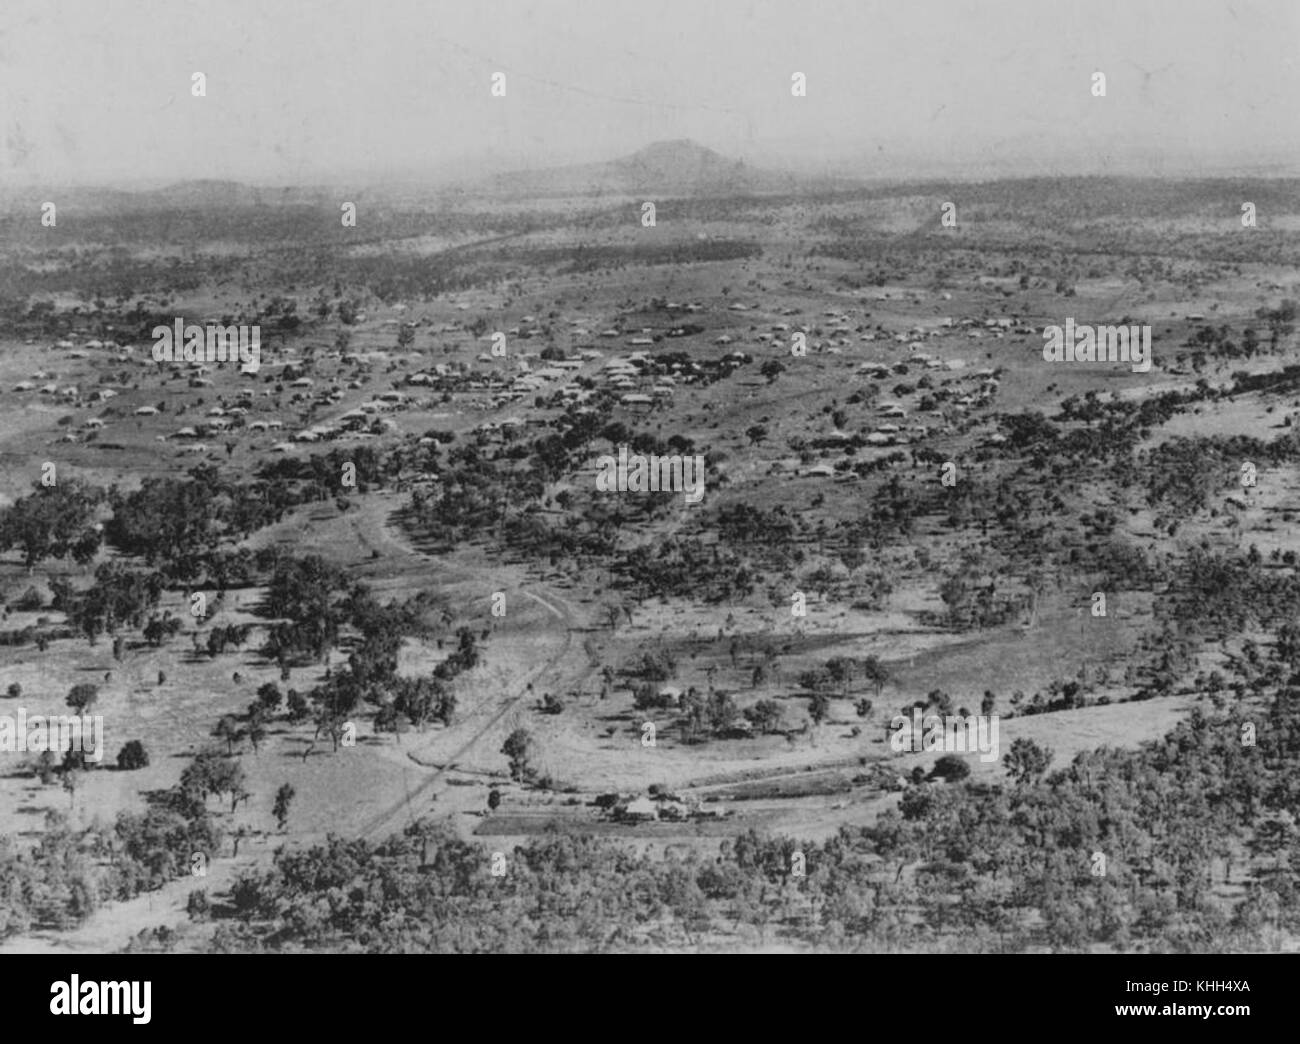 1 40007 Aerial view of Springsure district, 1930 Stock Photo